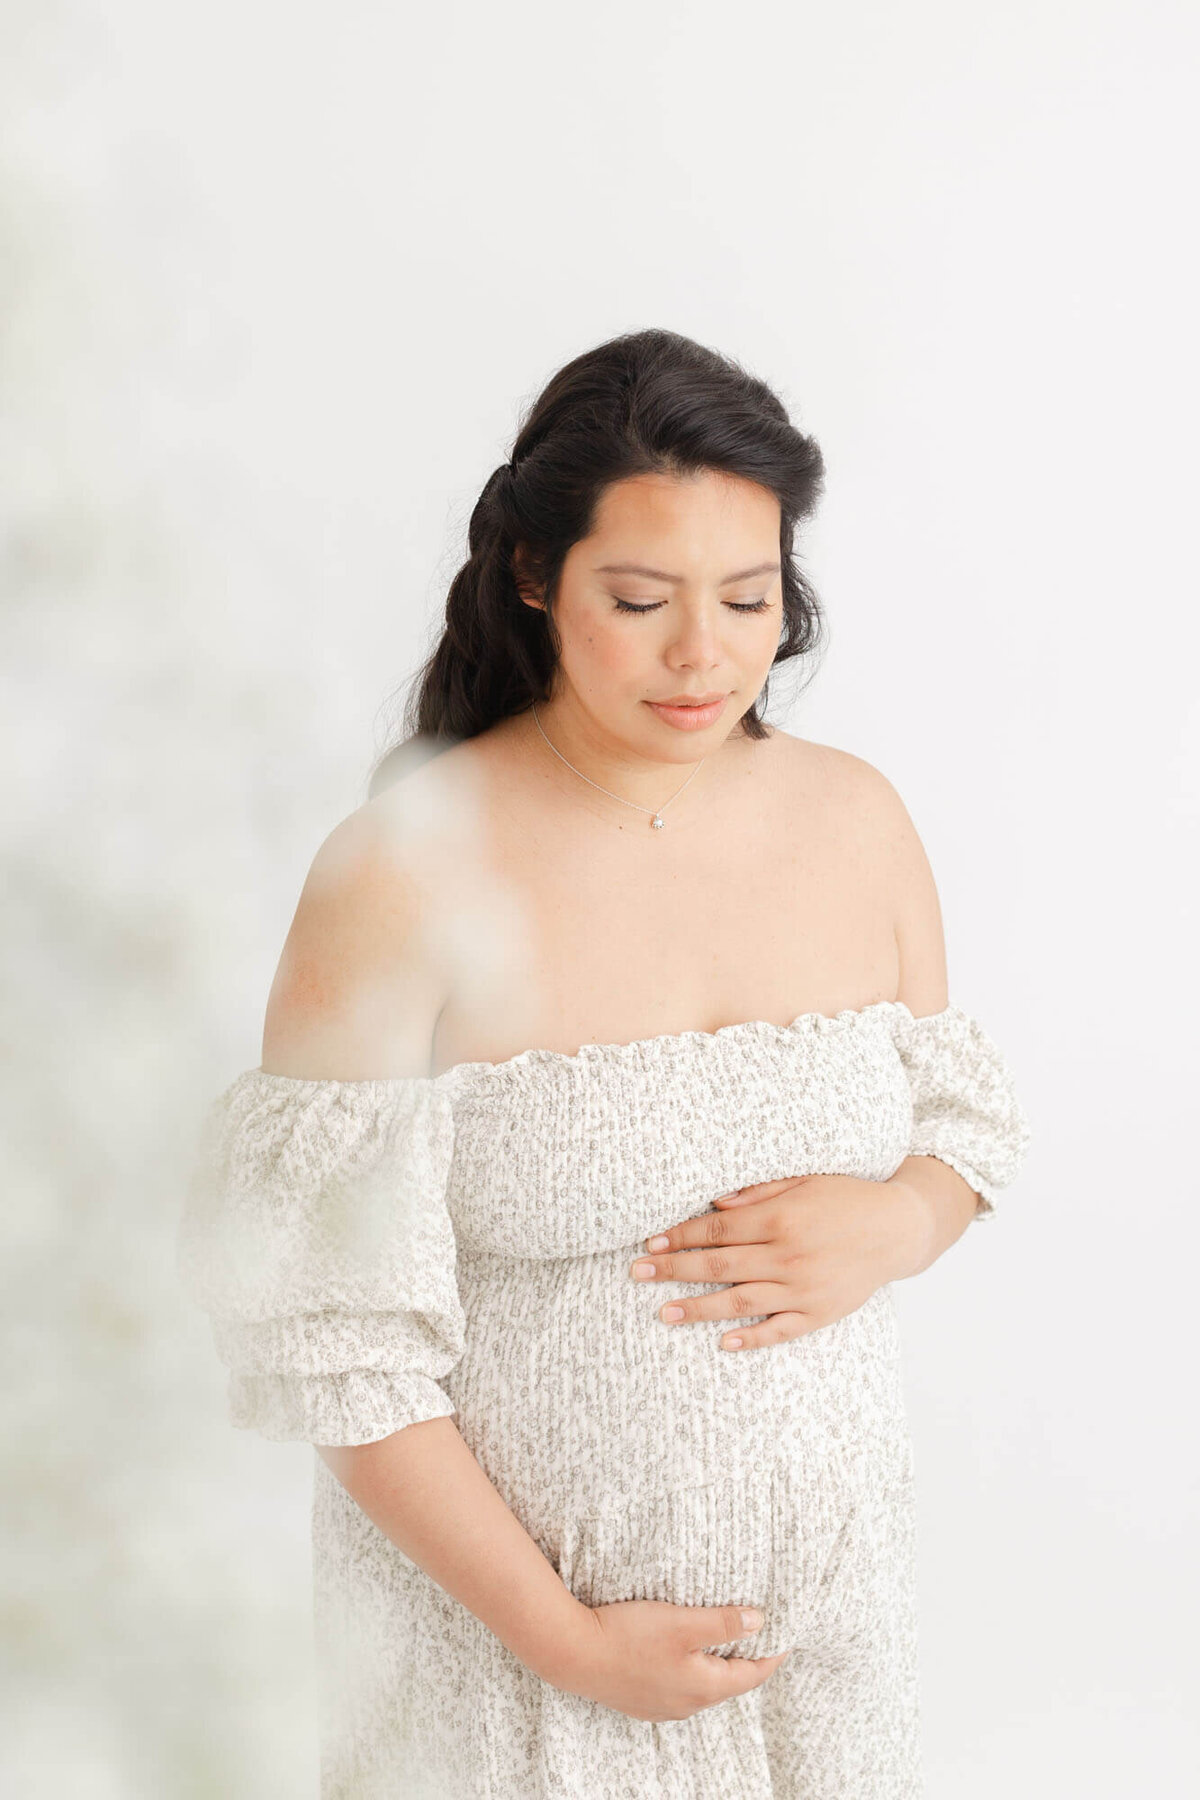 Pregnant Woman holding belly and looking down with a soft grin on her face. There are some white babys breath flowers in the foreground.